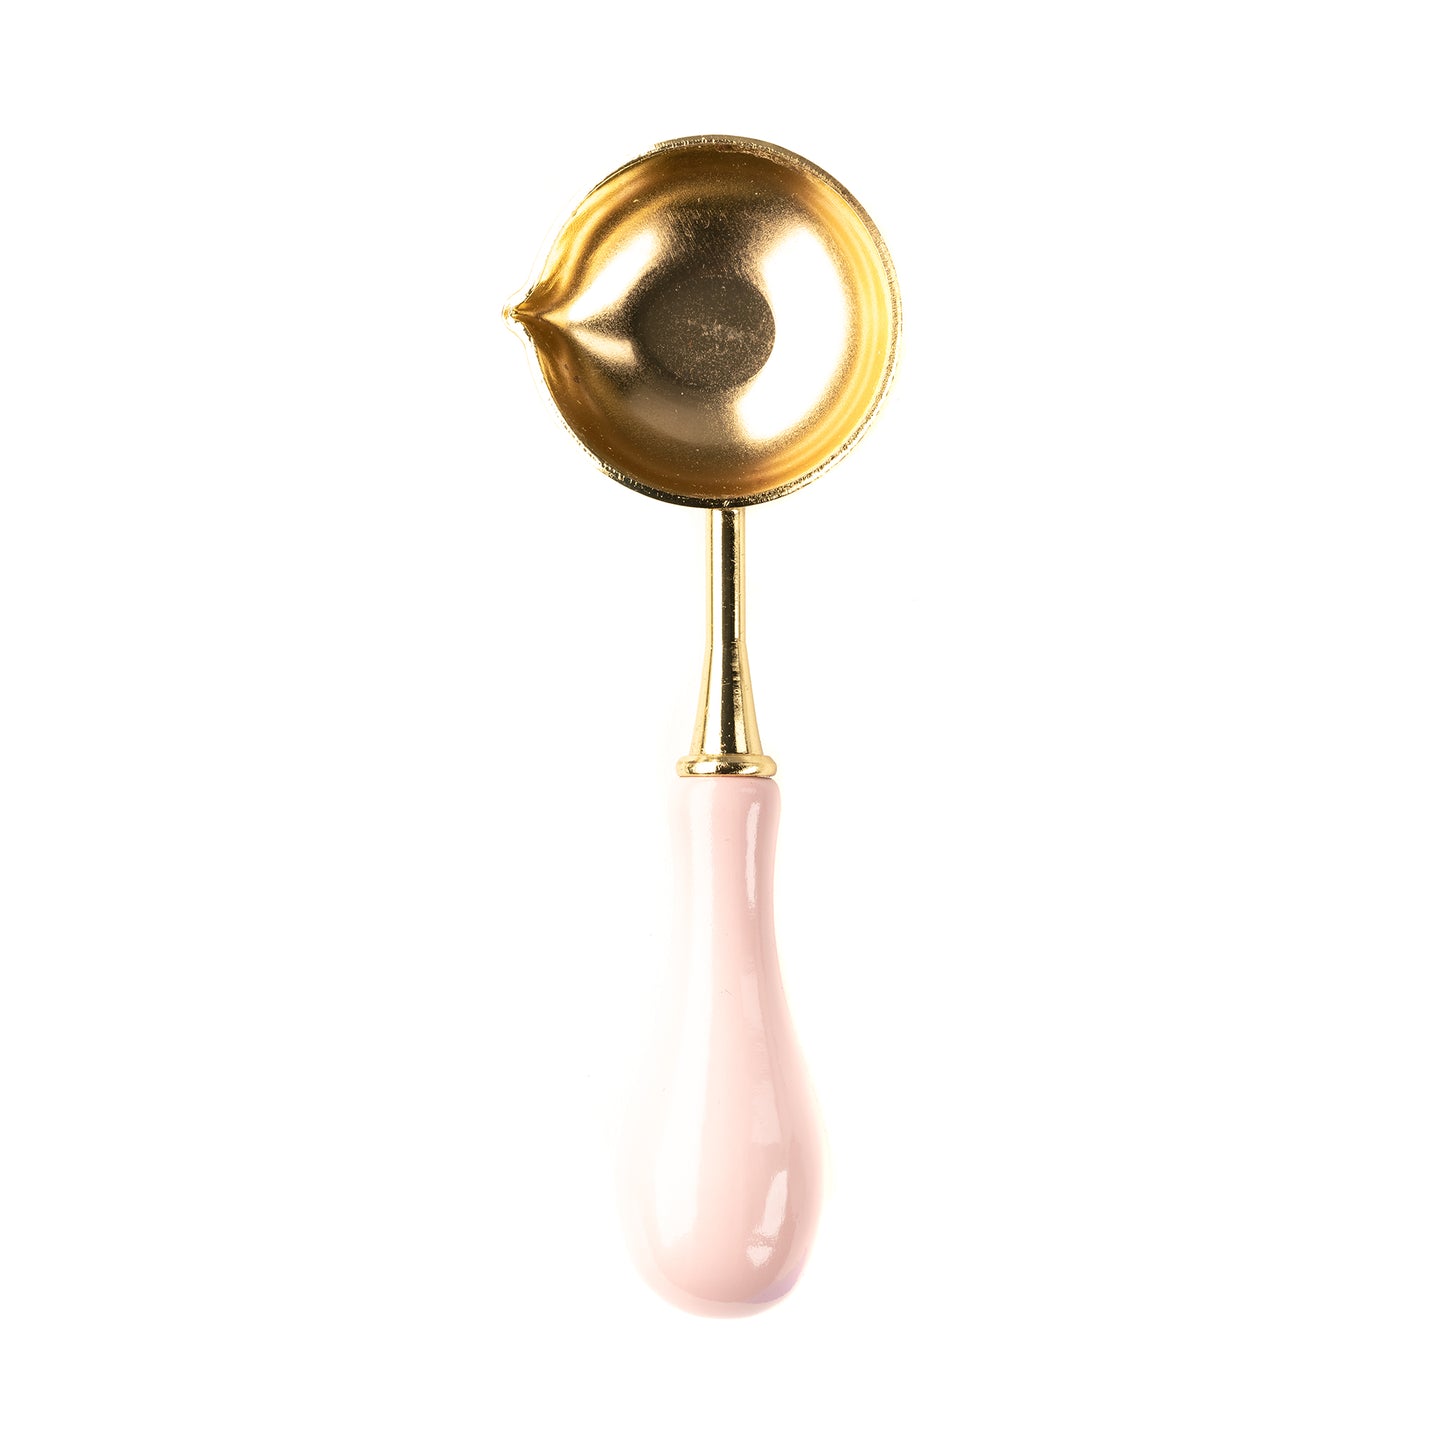 Pink Handle Gold Melting Spoon